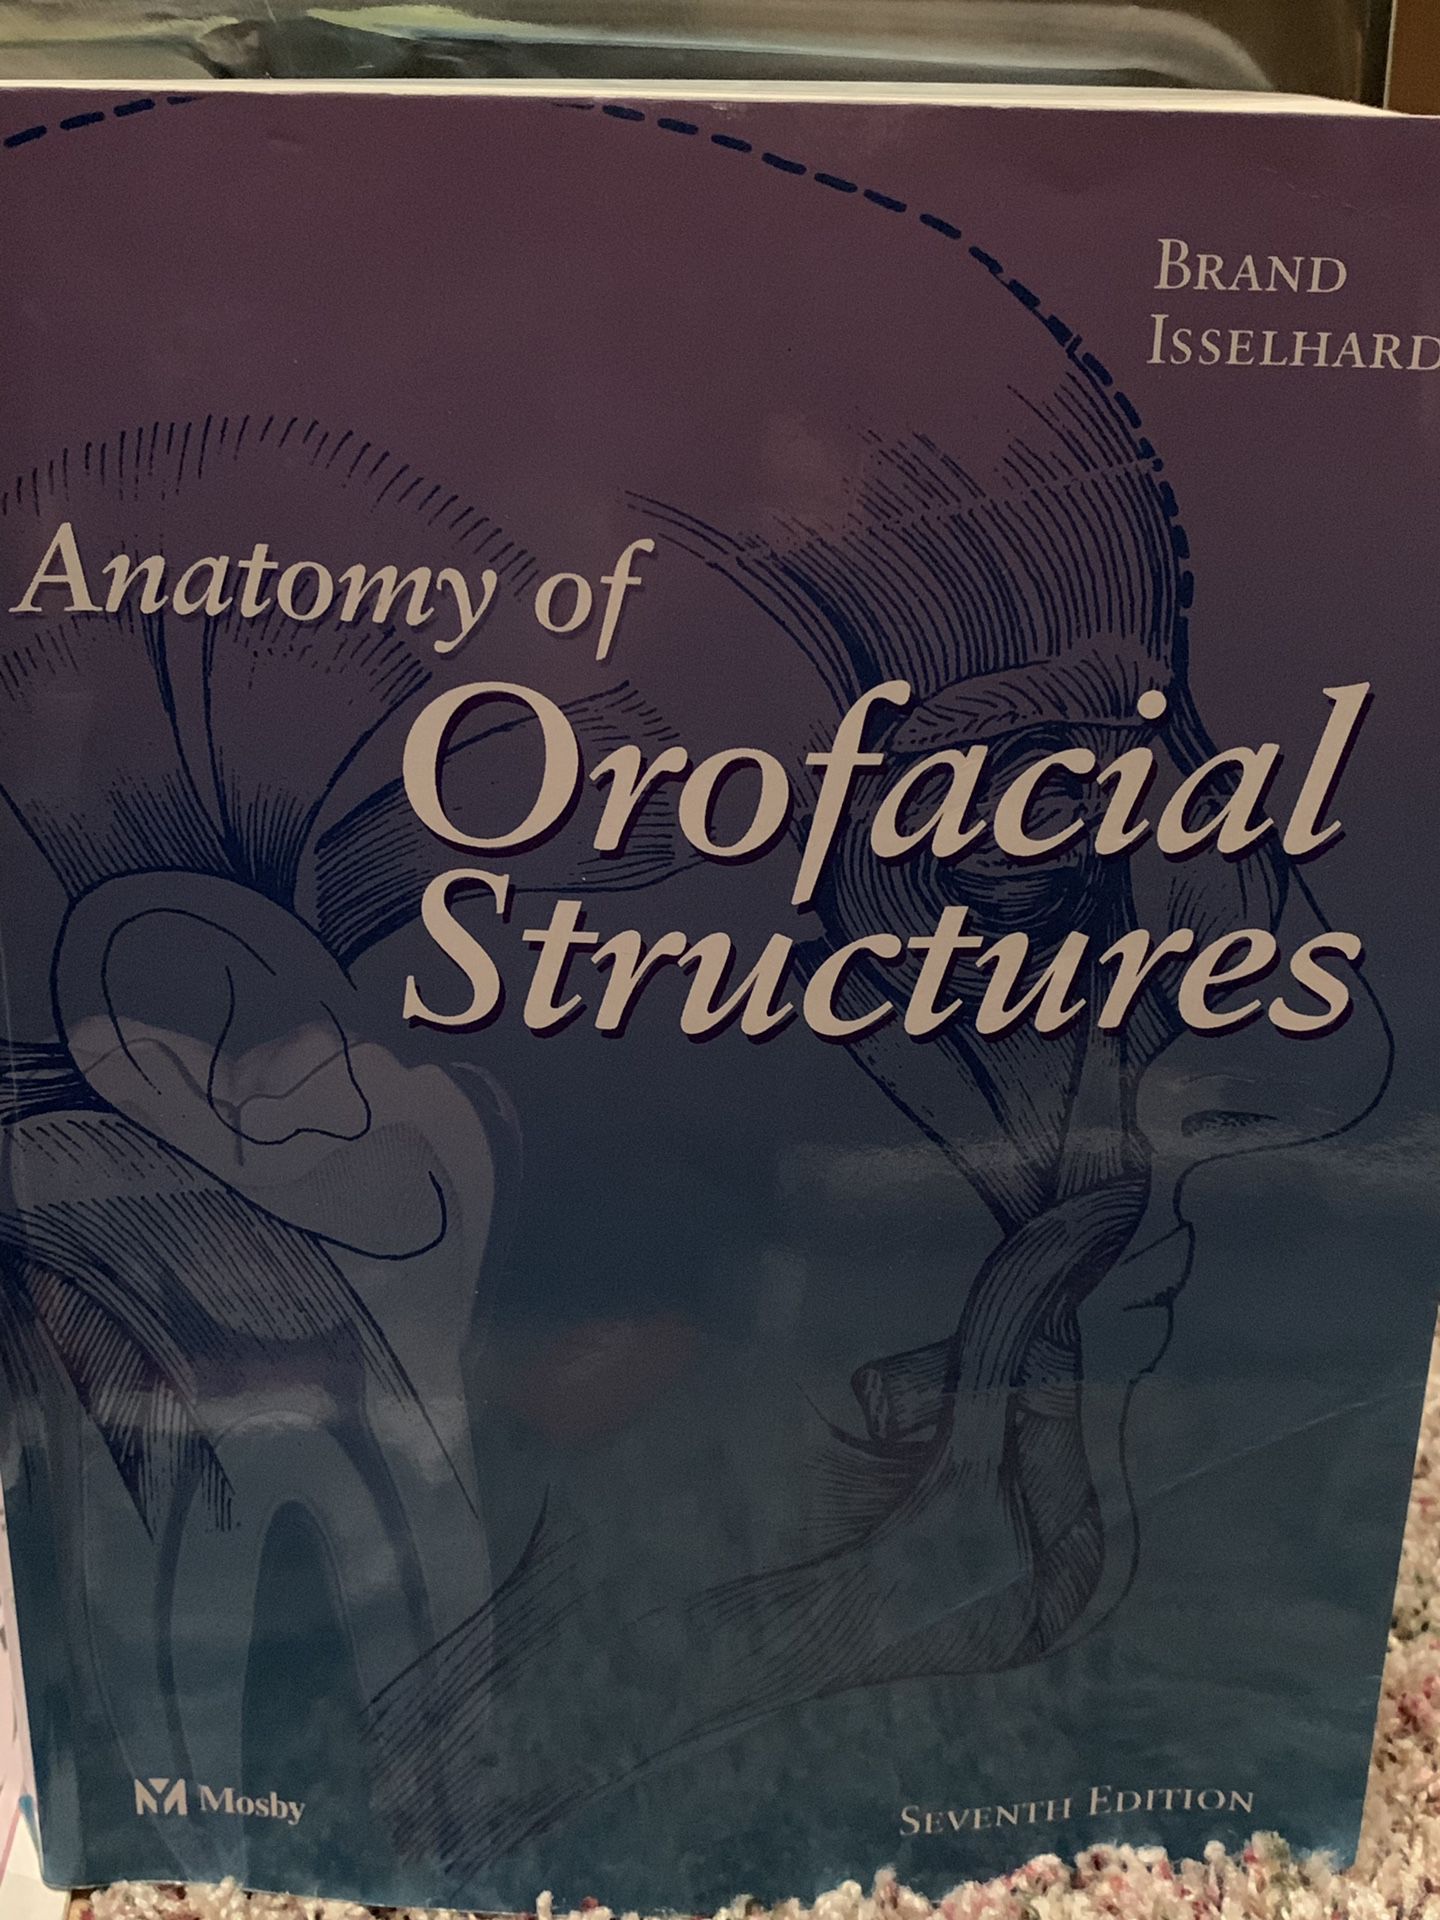 Anatomy of Orofacial Structures 7th edition.